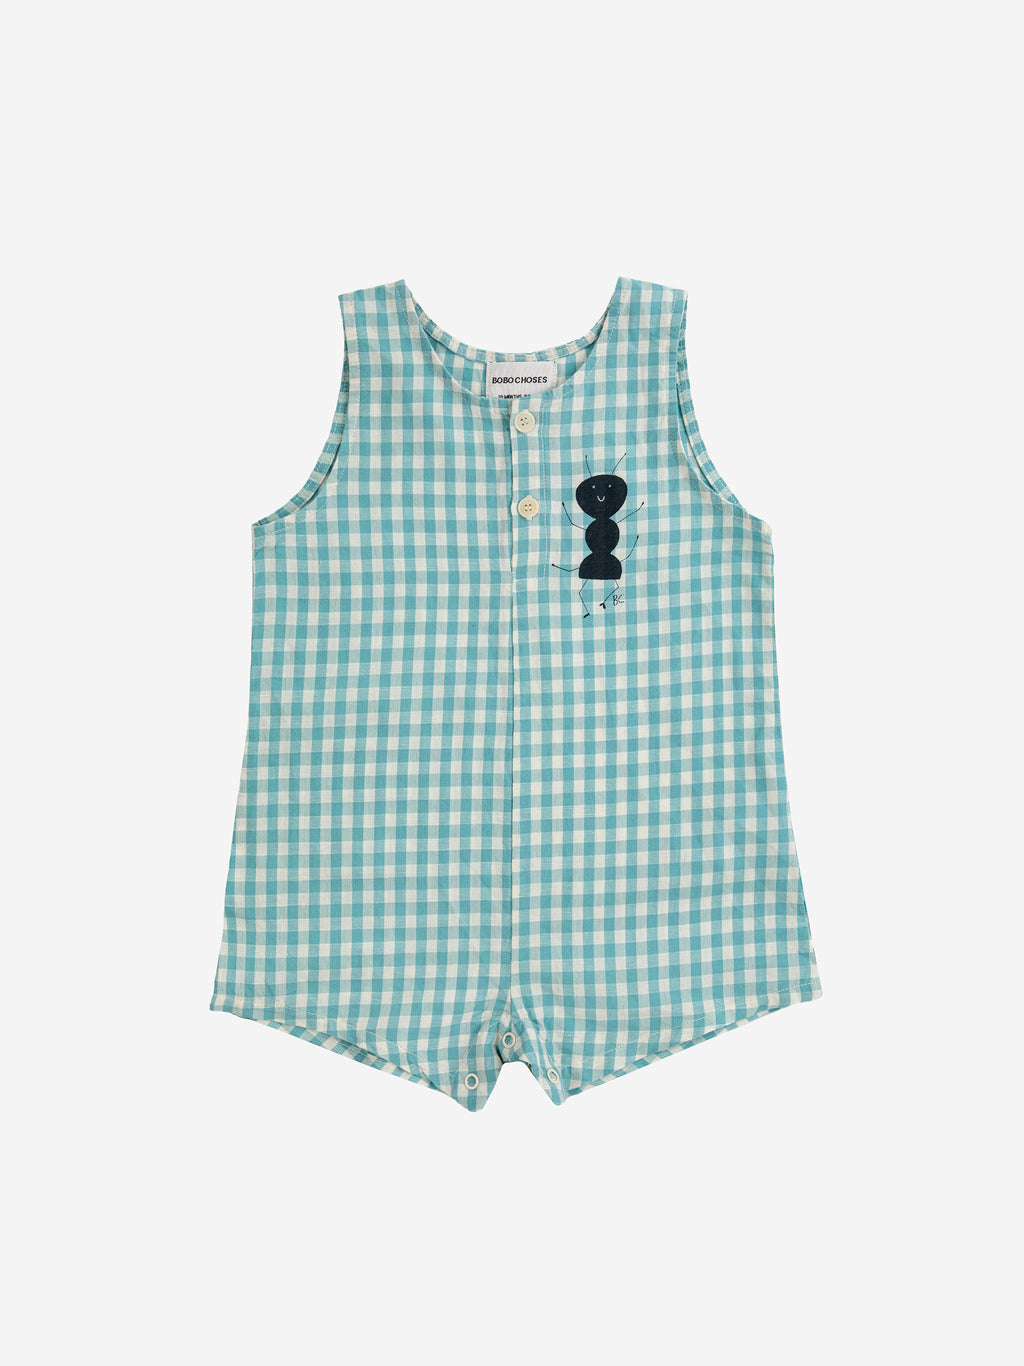 Bobo Choses Baby Ant Vichy Woven Playsuit - Turquoise